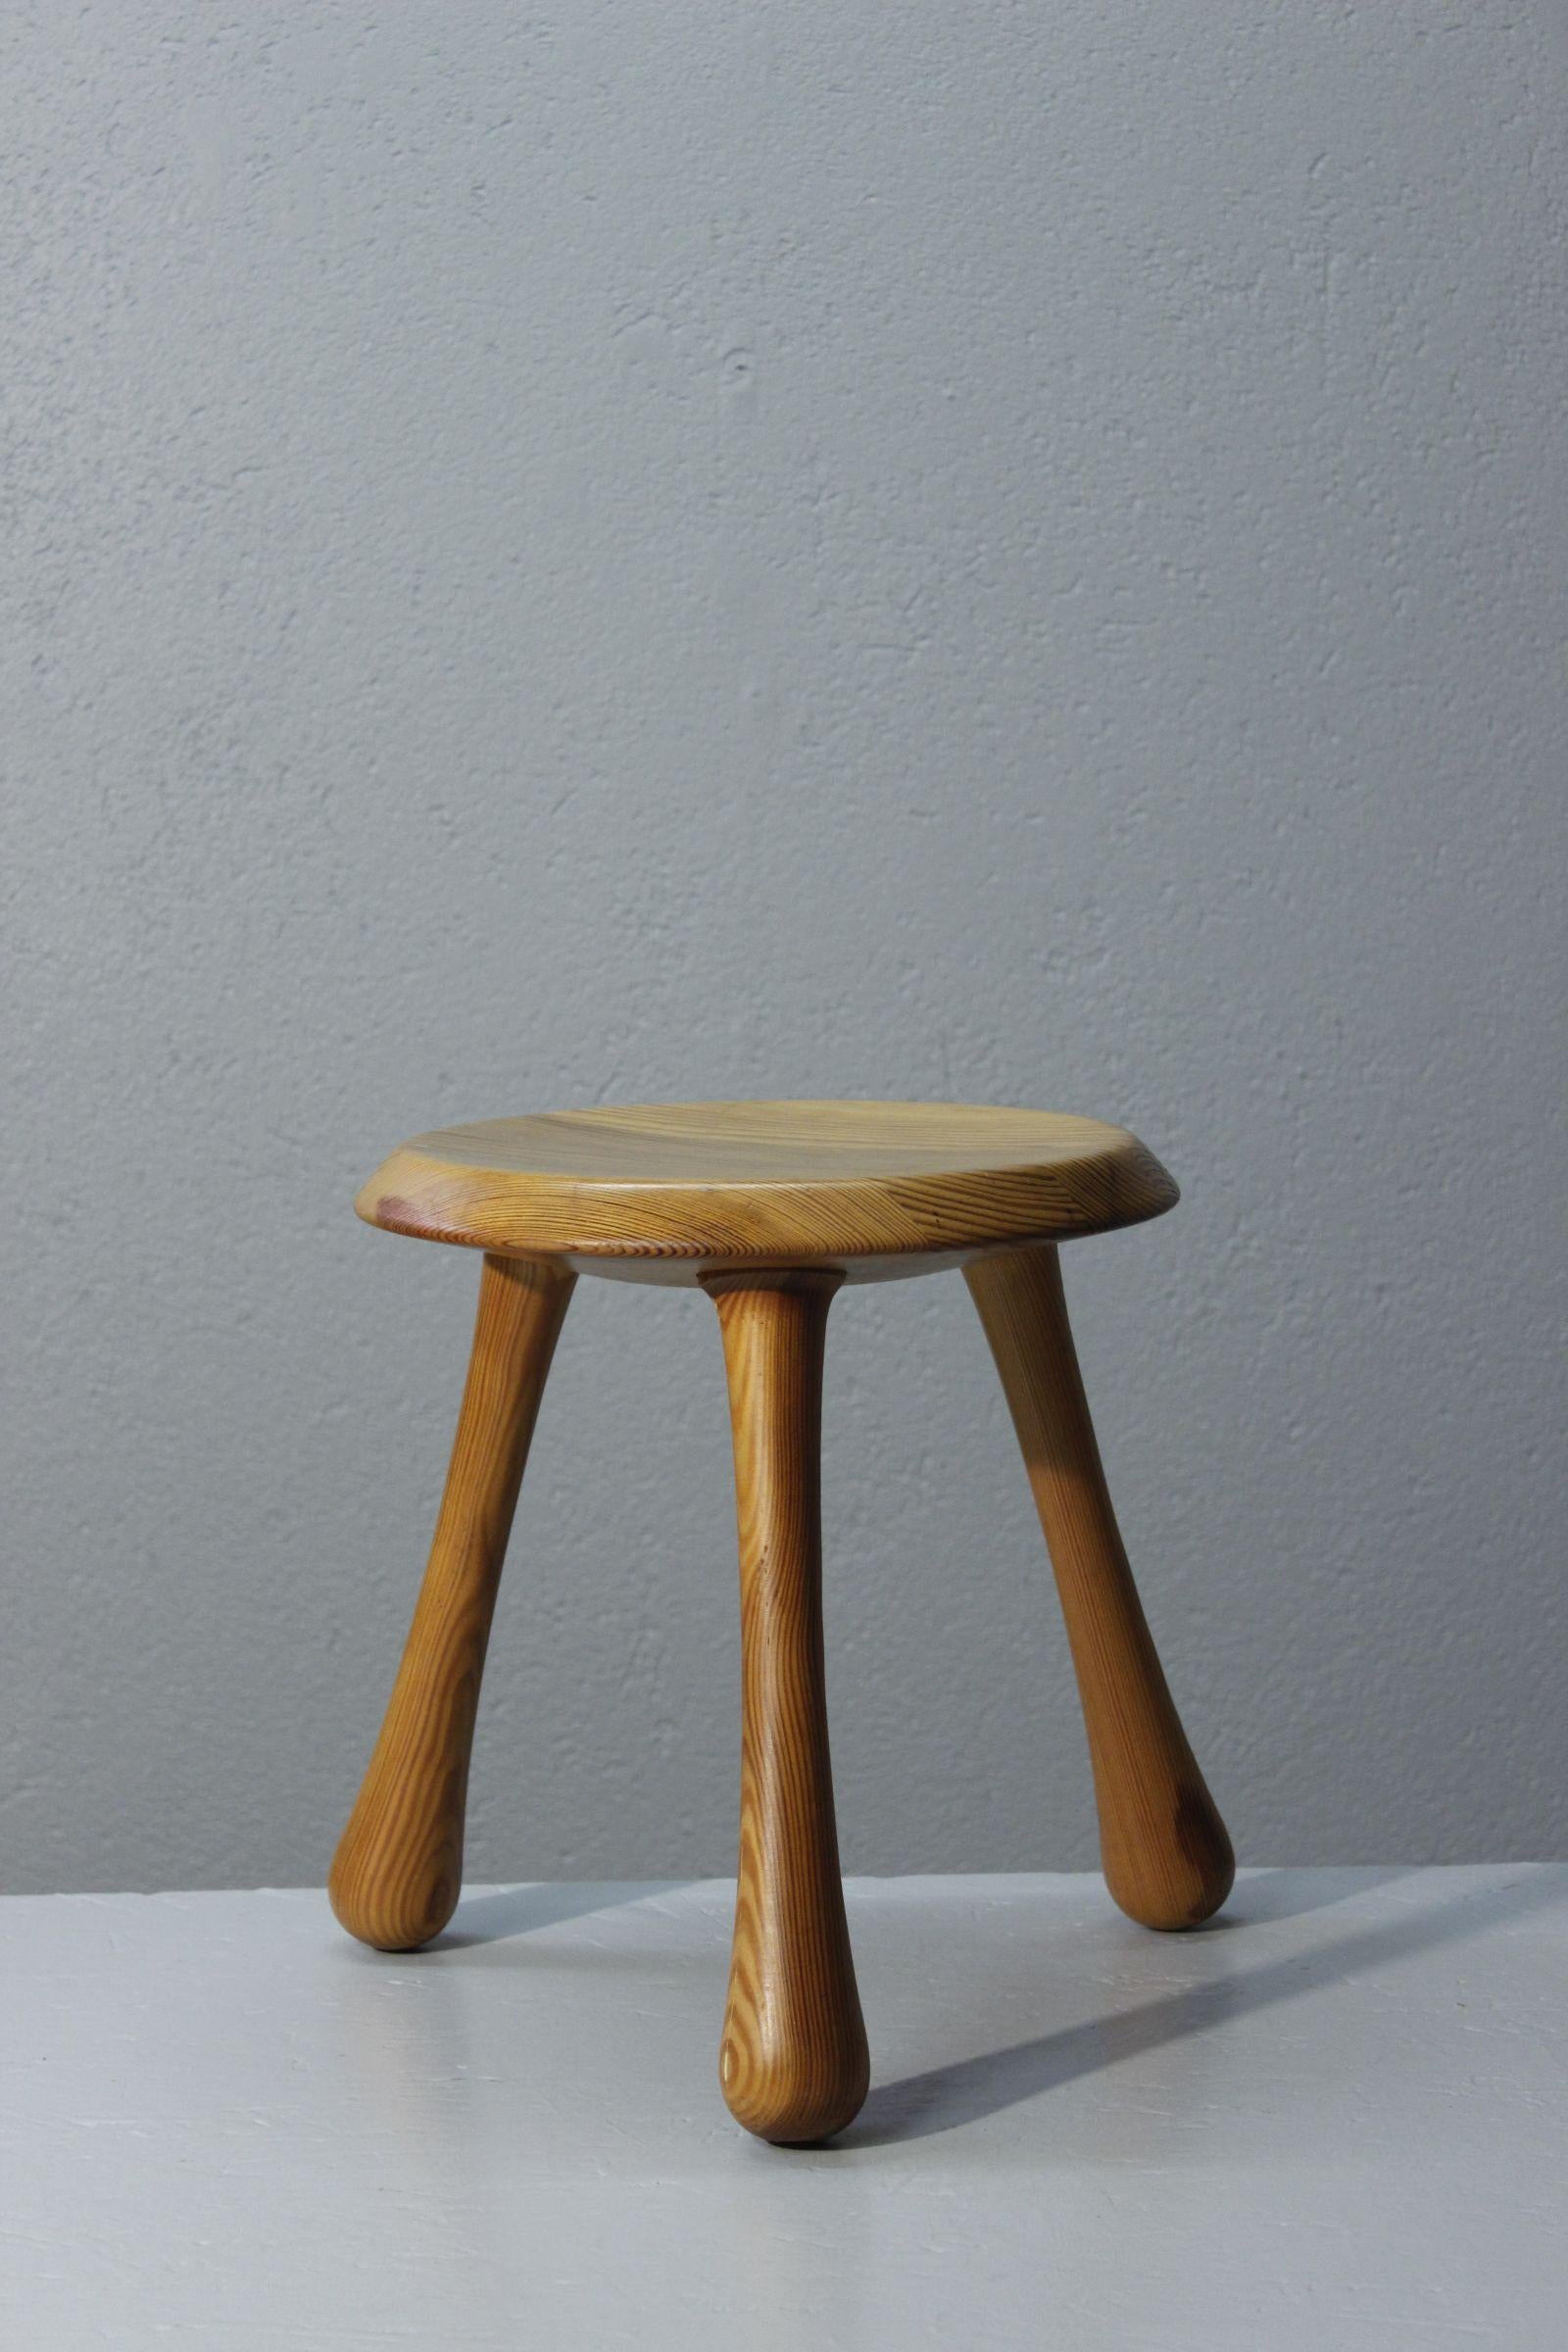 Rare tripod stool designed by Ikea founder Ingvar Kamprad for Habitat's VIP collection in 2004. 

In good condition, with scratches on the seat and a small crack on one leg, filled with wood putty. 